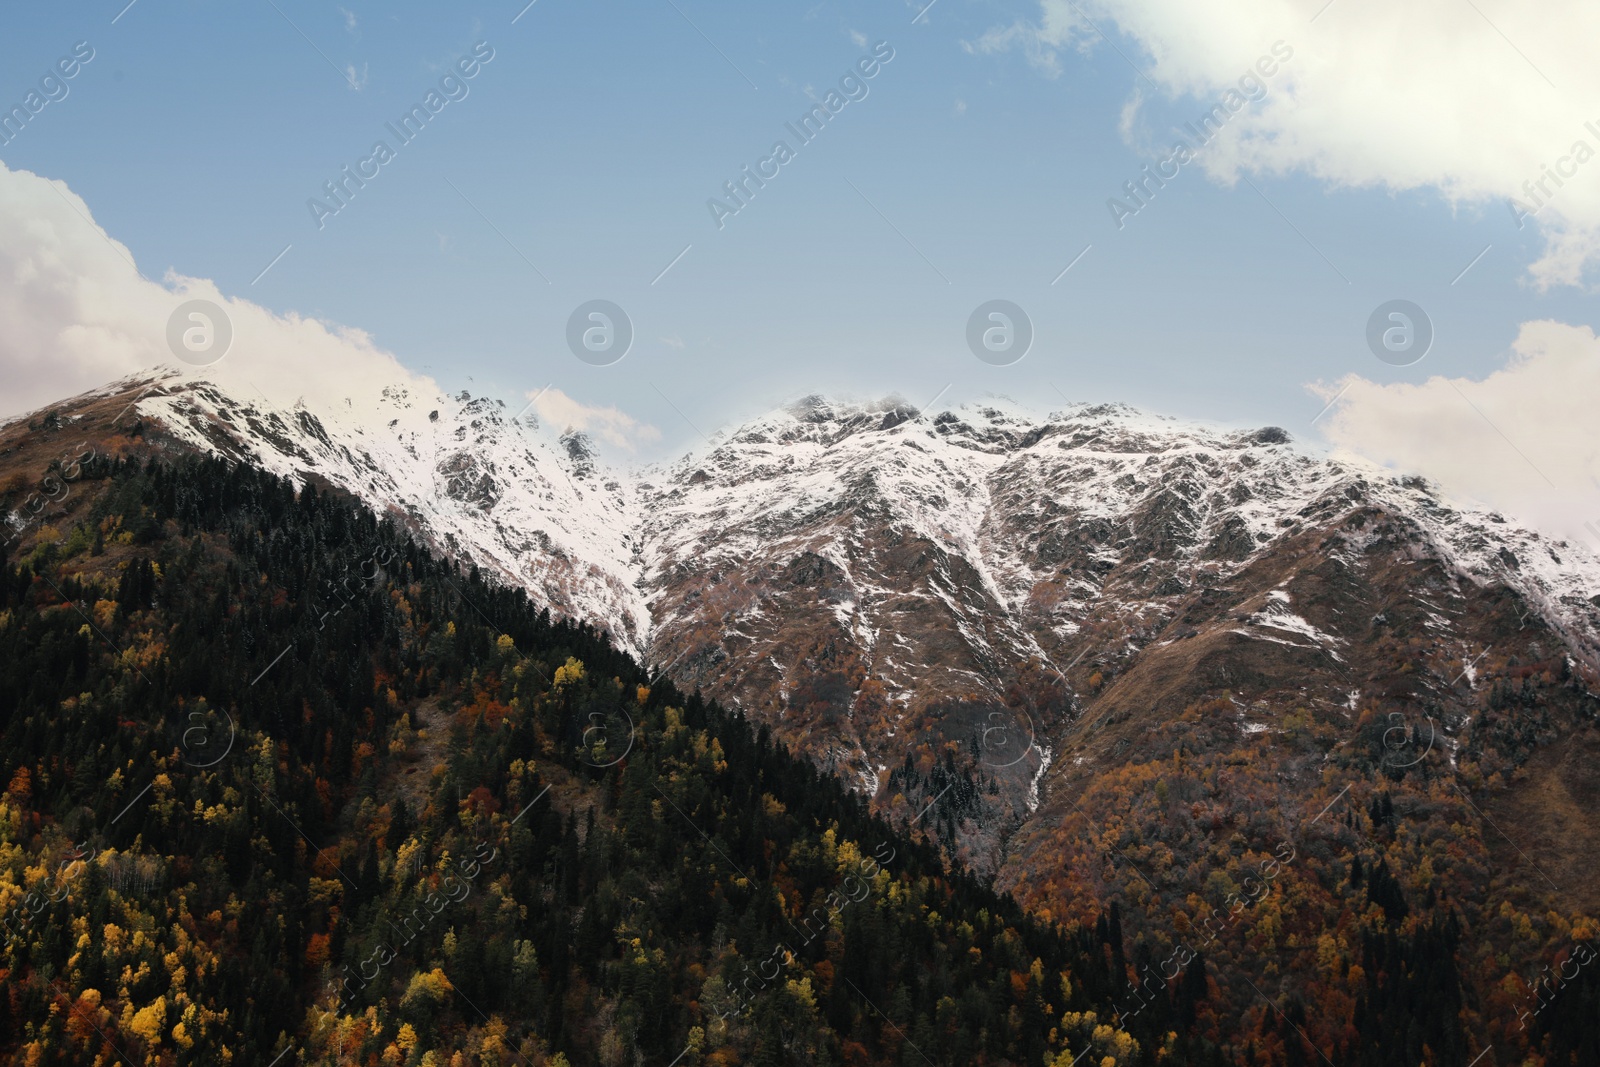 Photo of Picturesque landscape of high mountains with forest under cloudy sky